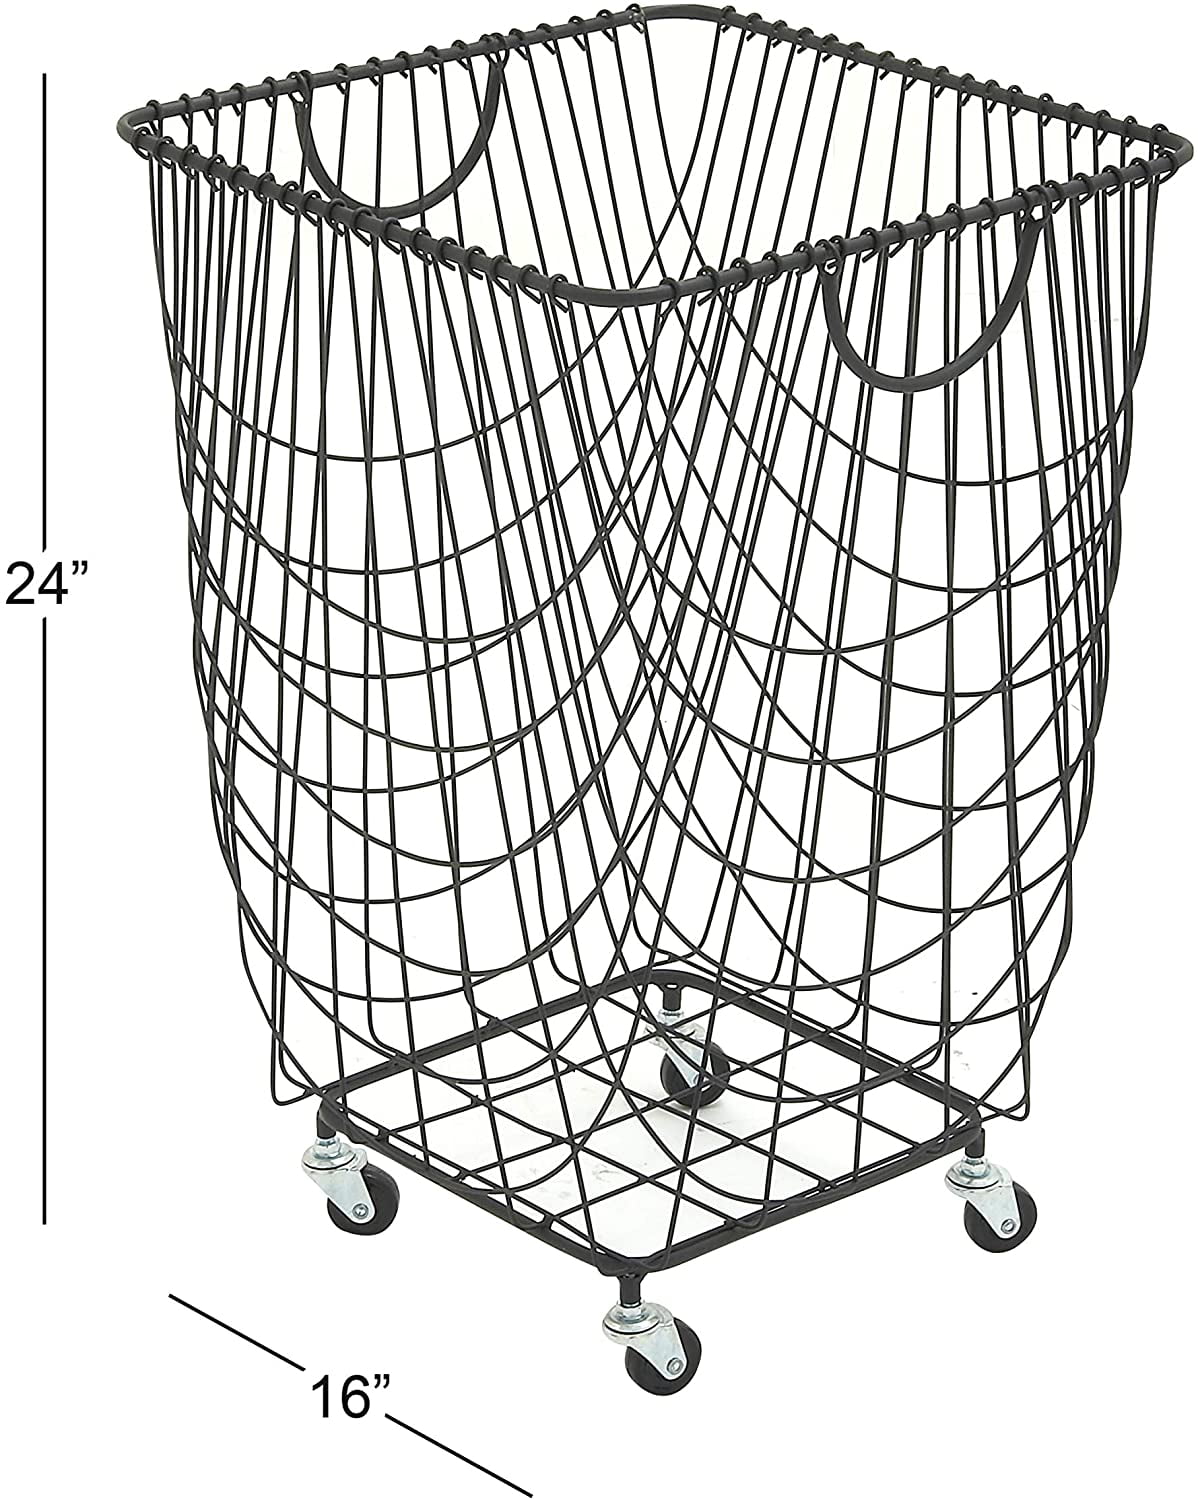 Details about   Large Rectangular Black Metal Laundry Basket With Wheels & Multi 